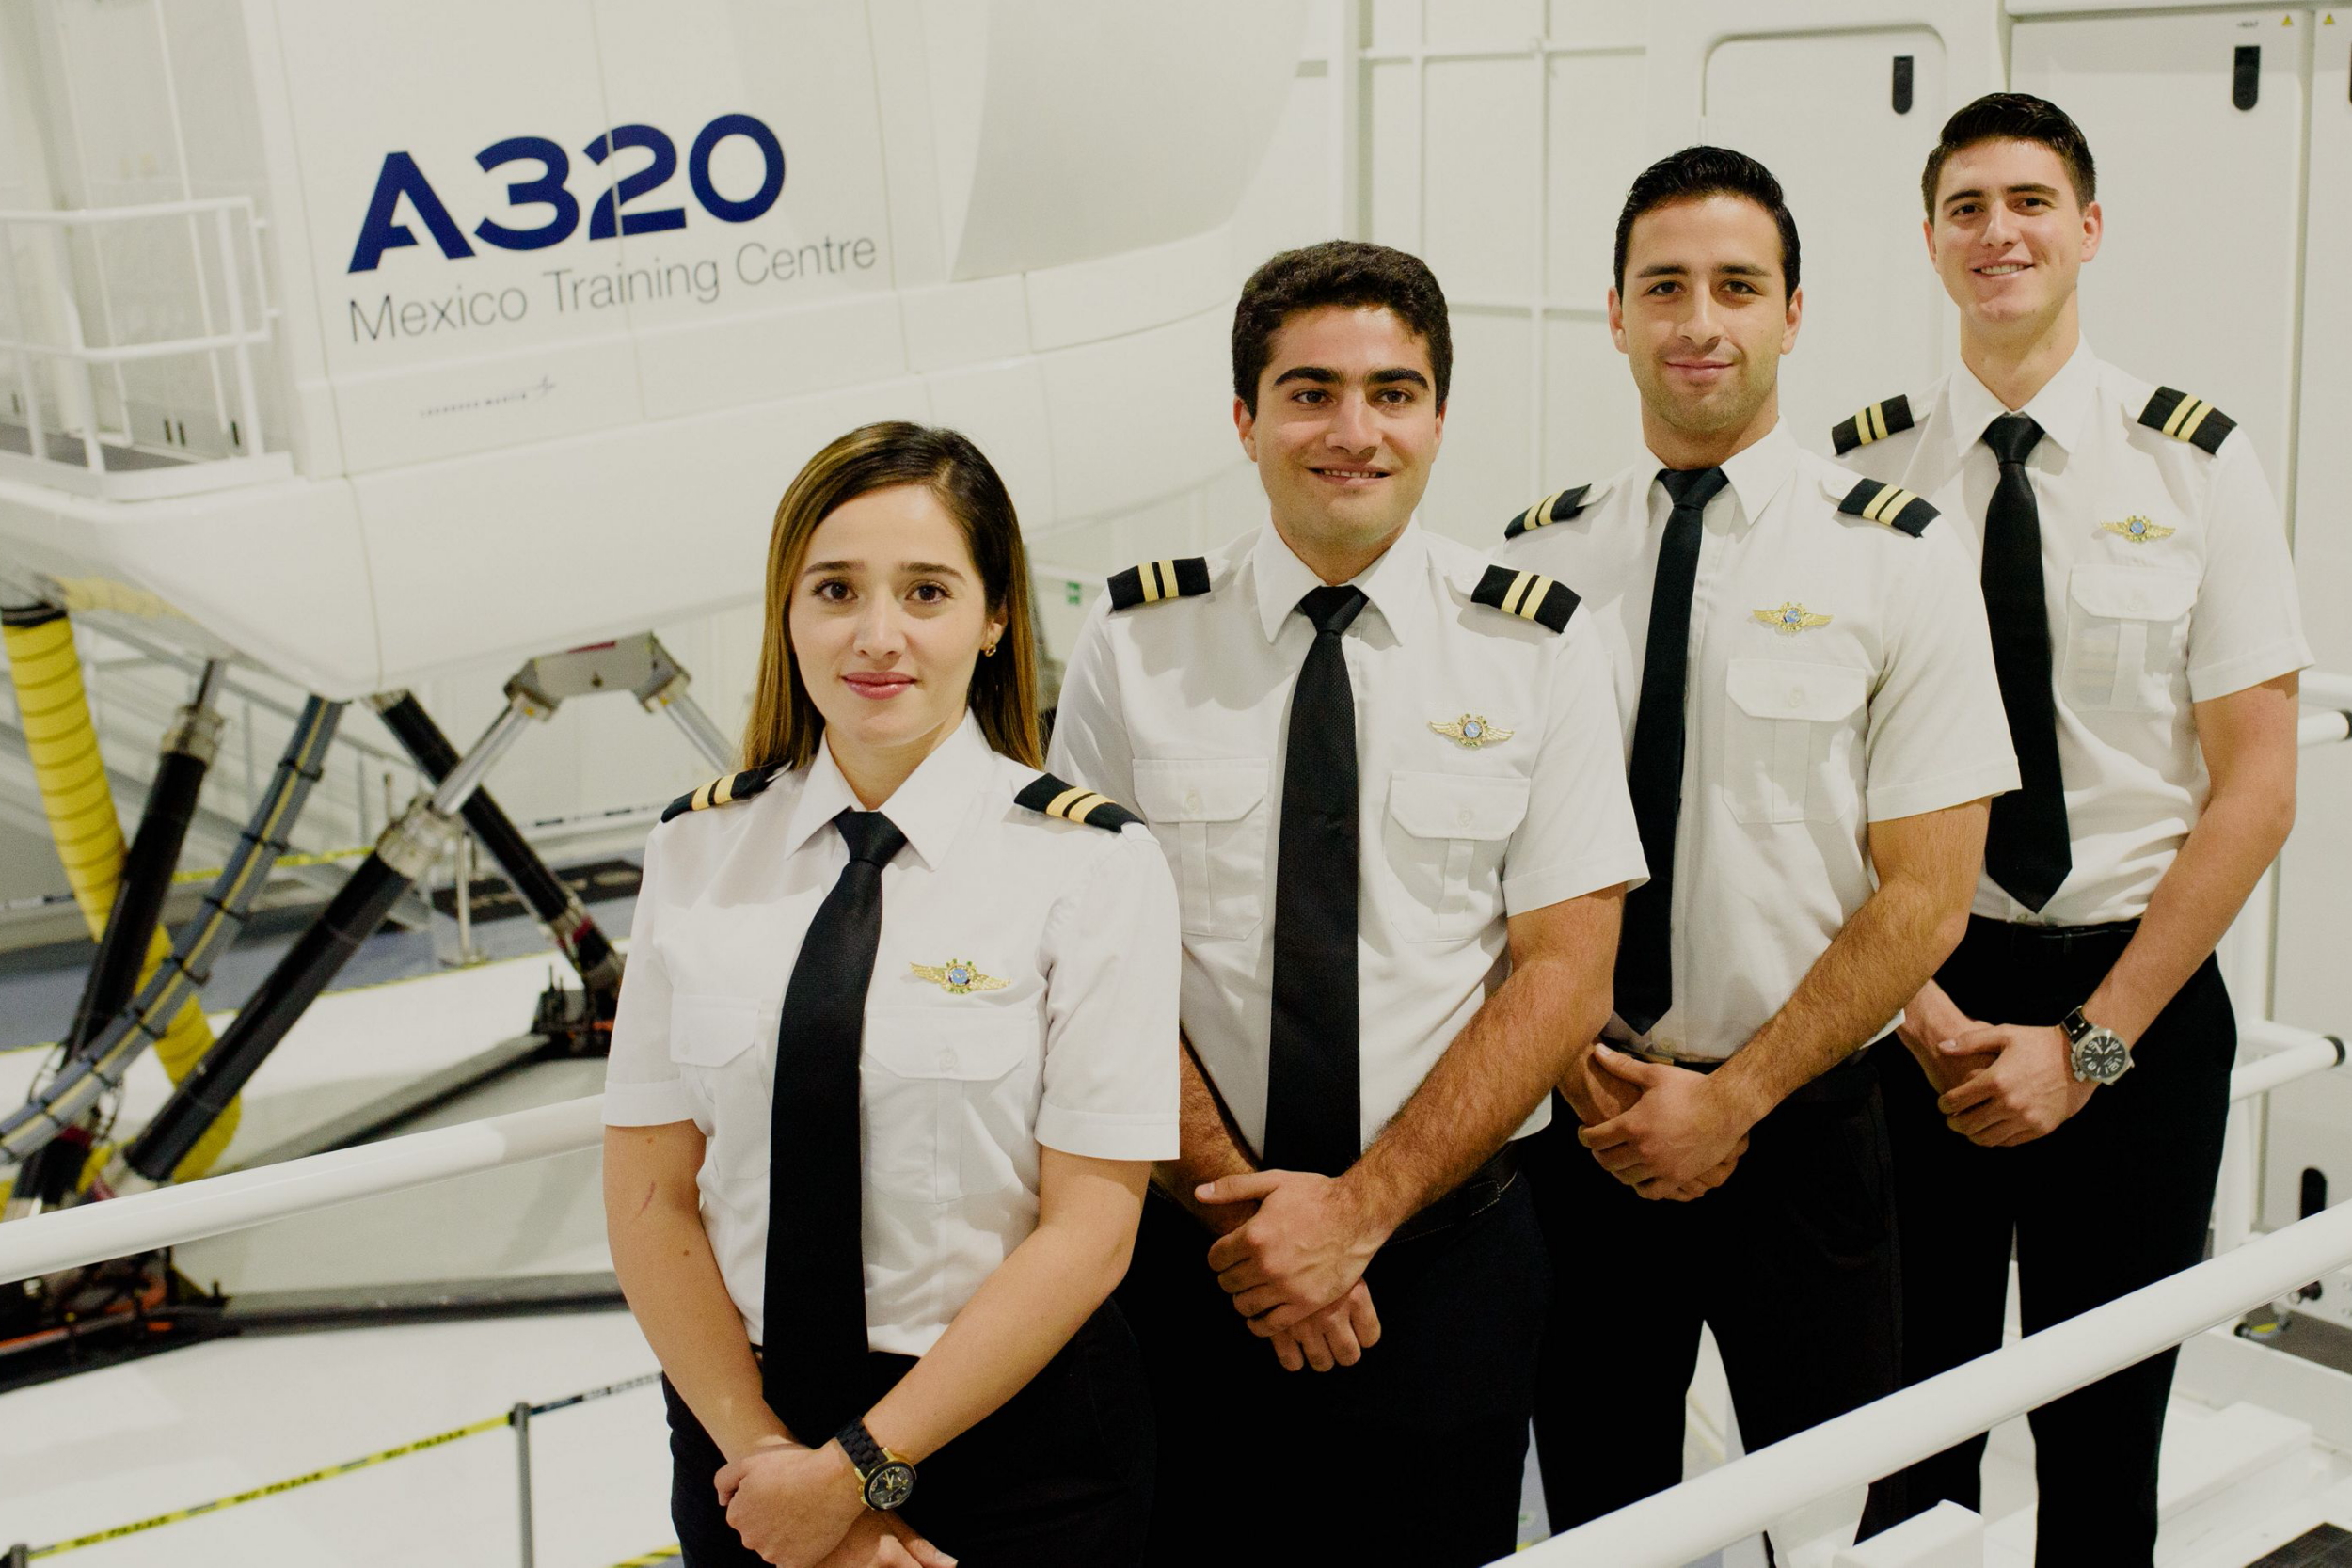 The ab initio Pilot Cadet Training Programme, co-developed by Airbus and France’s ENAC civil aviation university, supports airline customers in contributing to the long-term availability of qualified pilots. Click to enlarge.